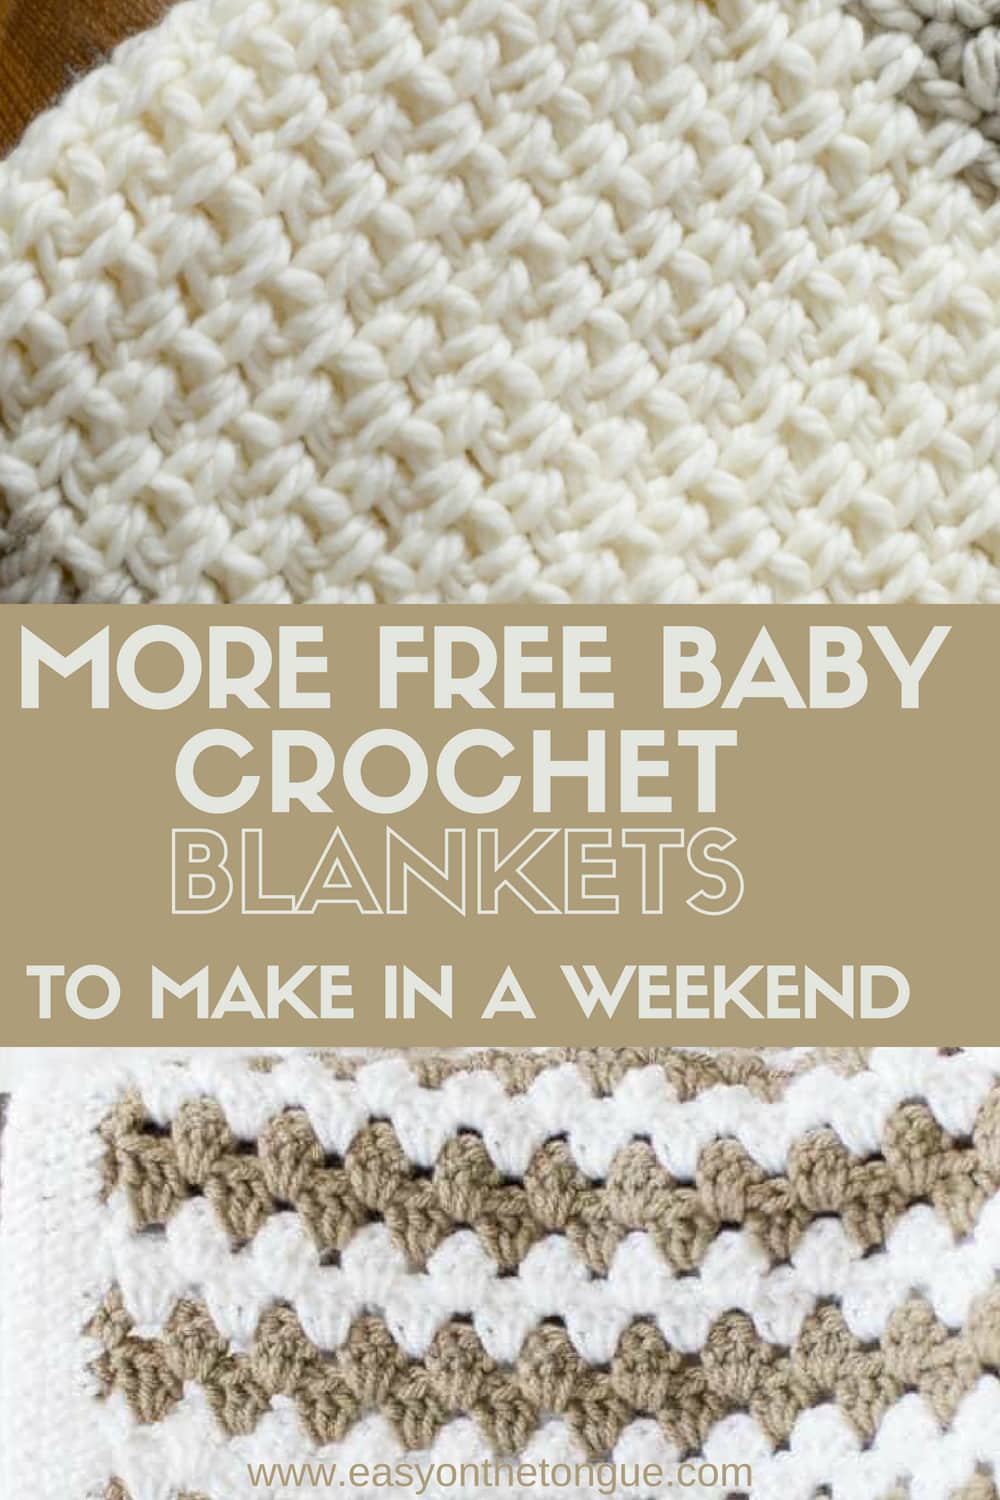 More Free Baby Crochet Blankets to make in a weekend Quick and Easy Crochet Baby Blanket Patterns on Etsy to make